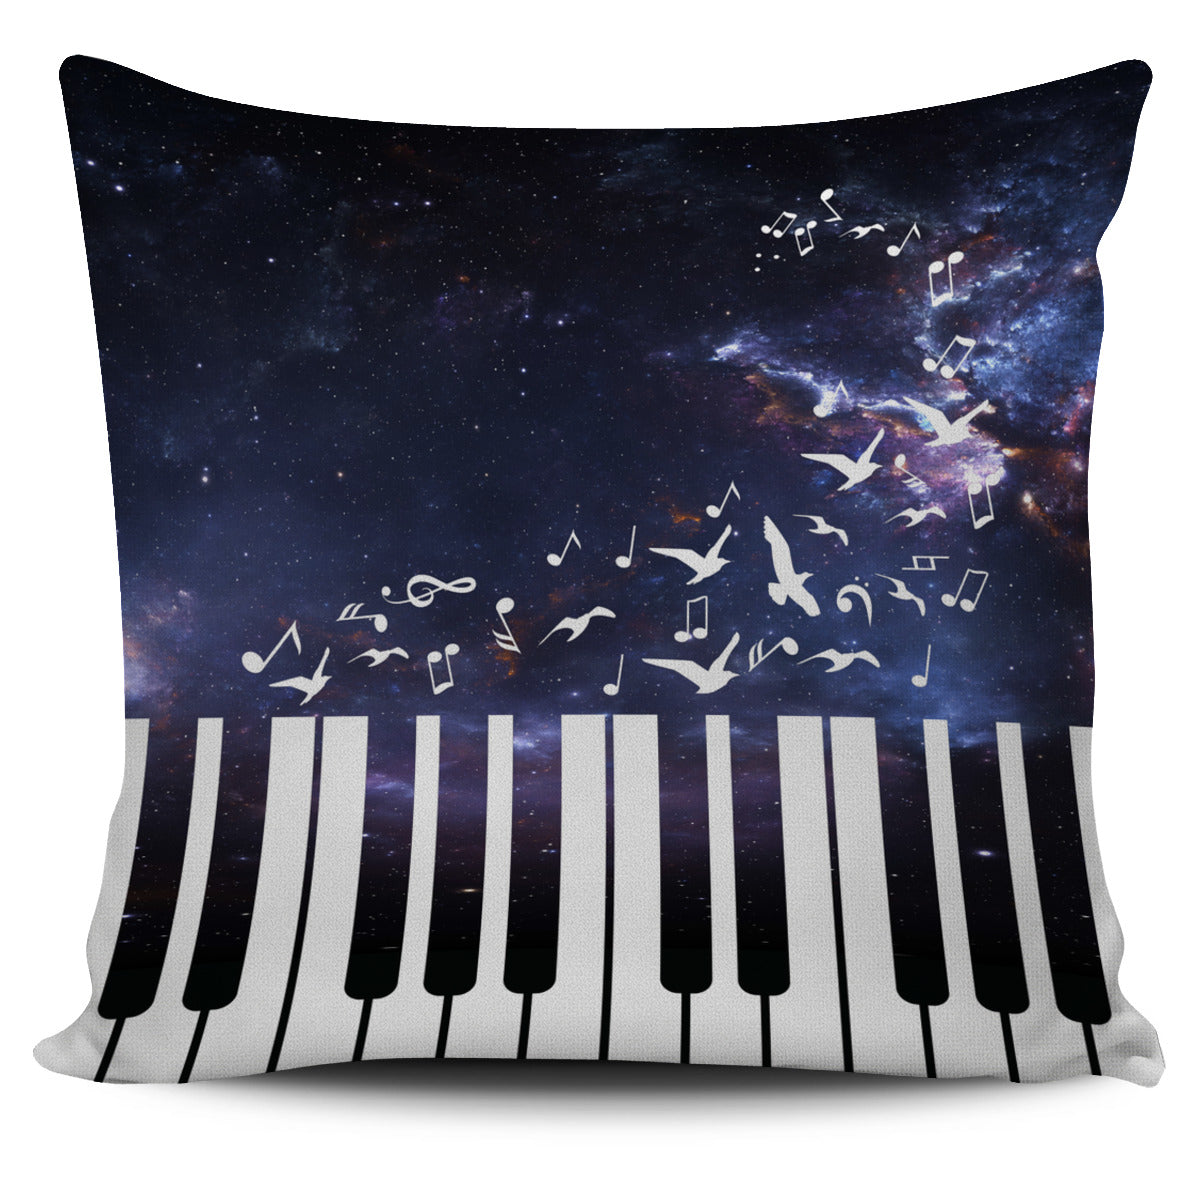 Space Piano Pillow Cover